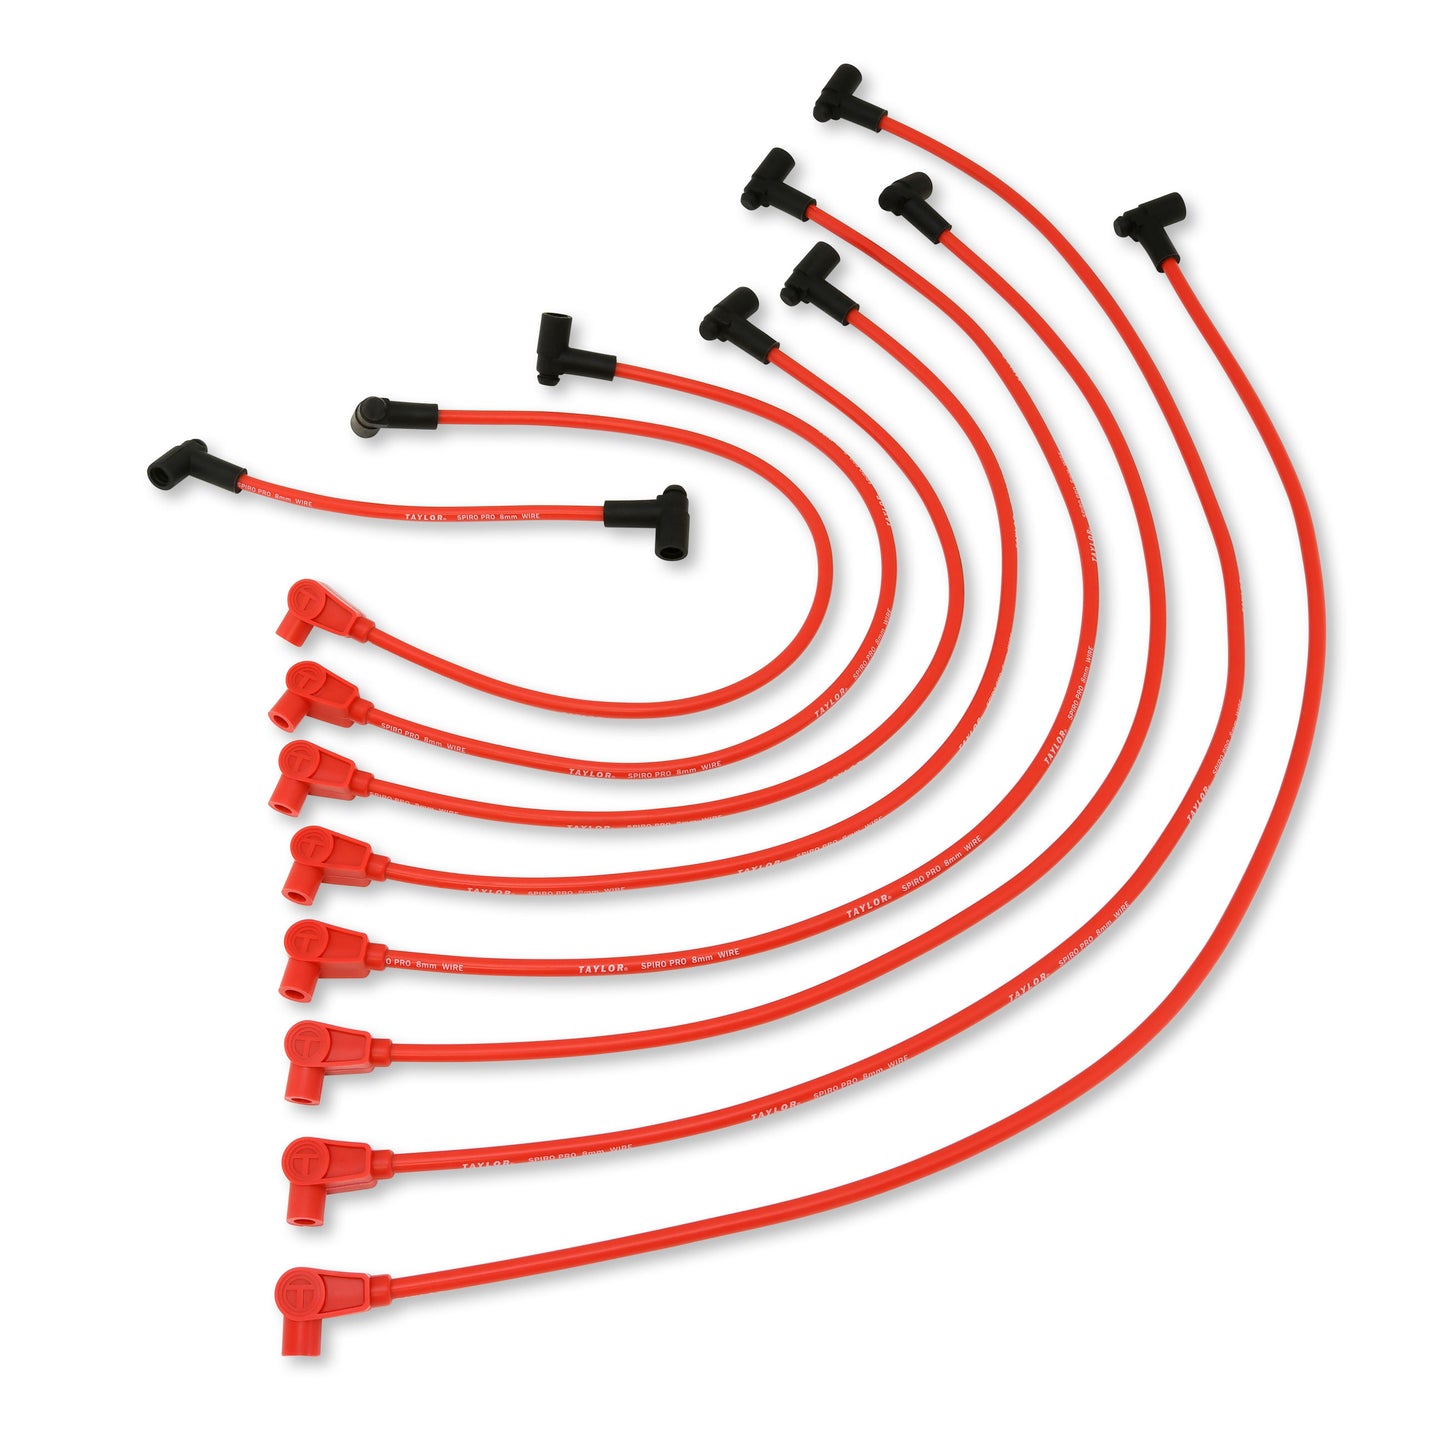 Taylor Cable 74232 8mm Spiro-Pro Custom Spark Plug Wires 8 cyl red